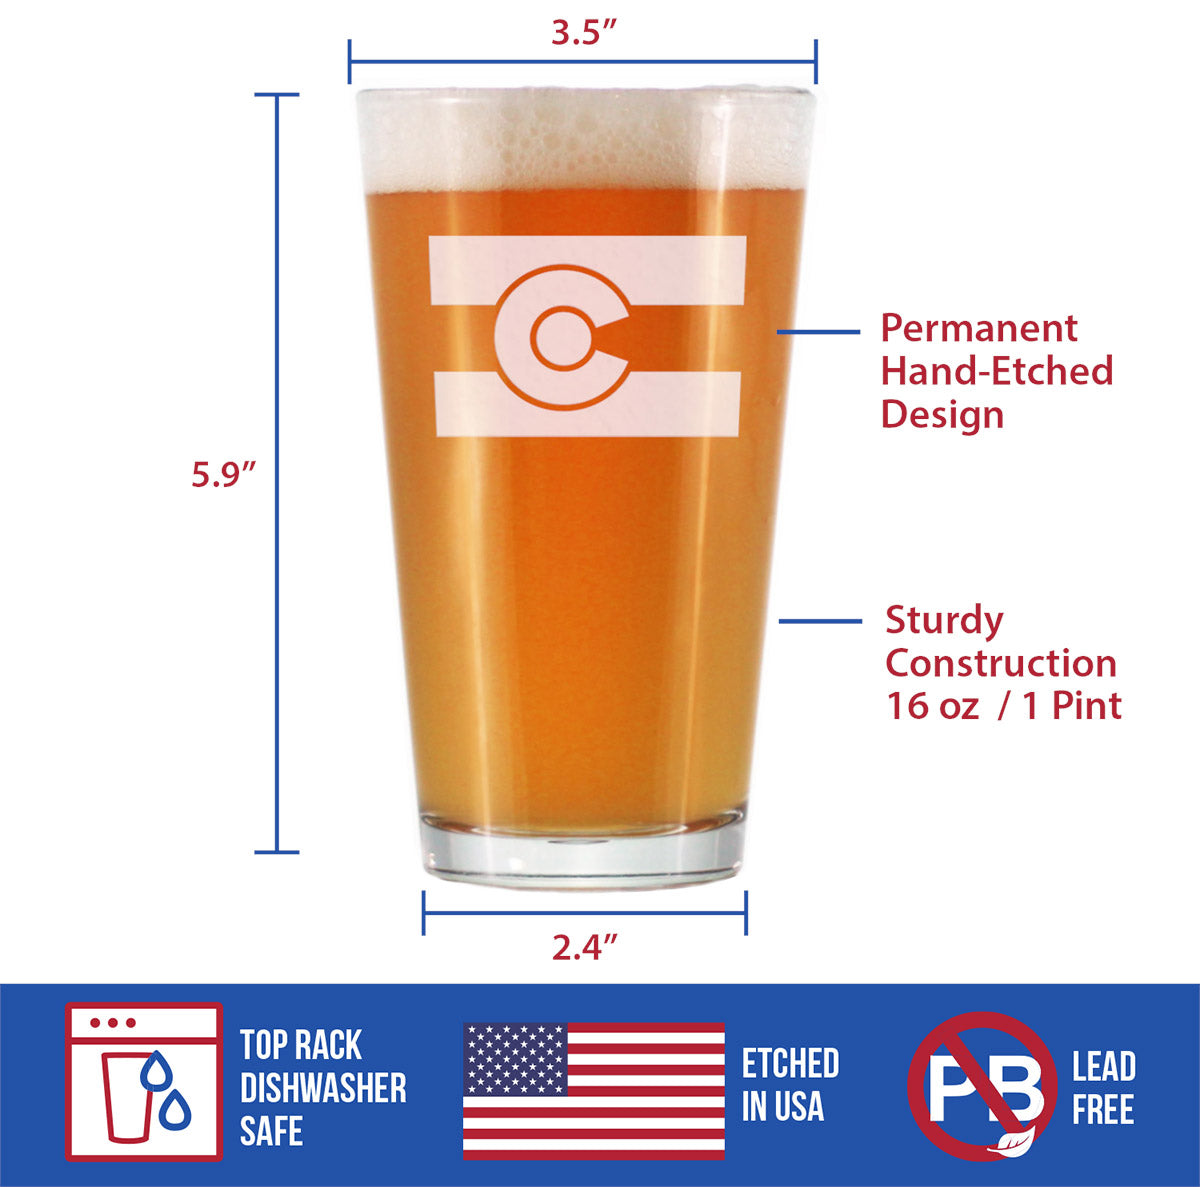 Colorado Flag - Pint Glass for Beer - Glass Gift for Lovers of Colorado, Centennial State Themed Decor - 16 oz